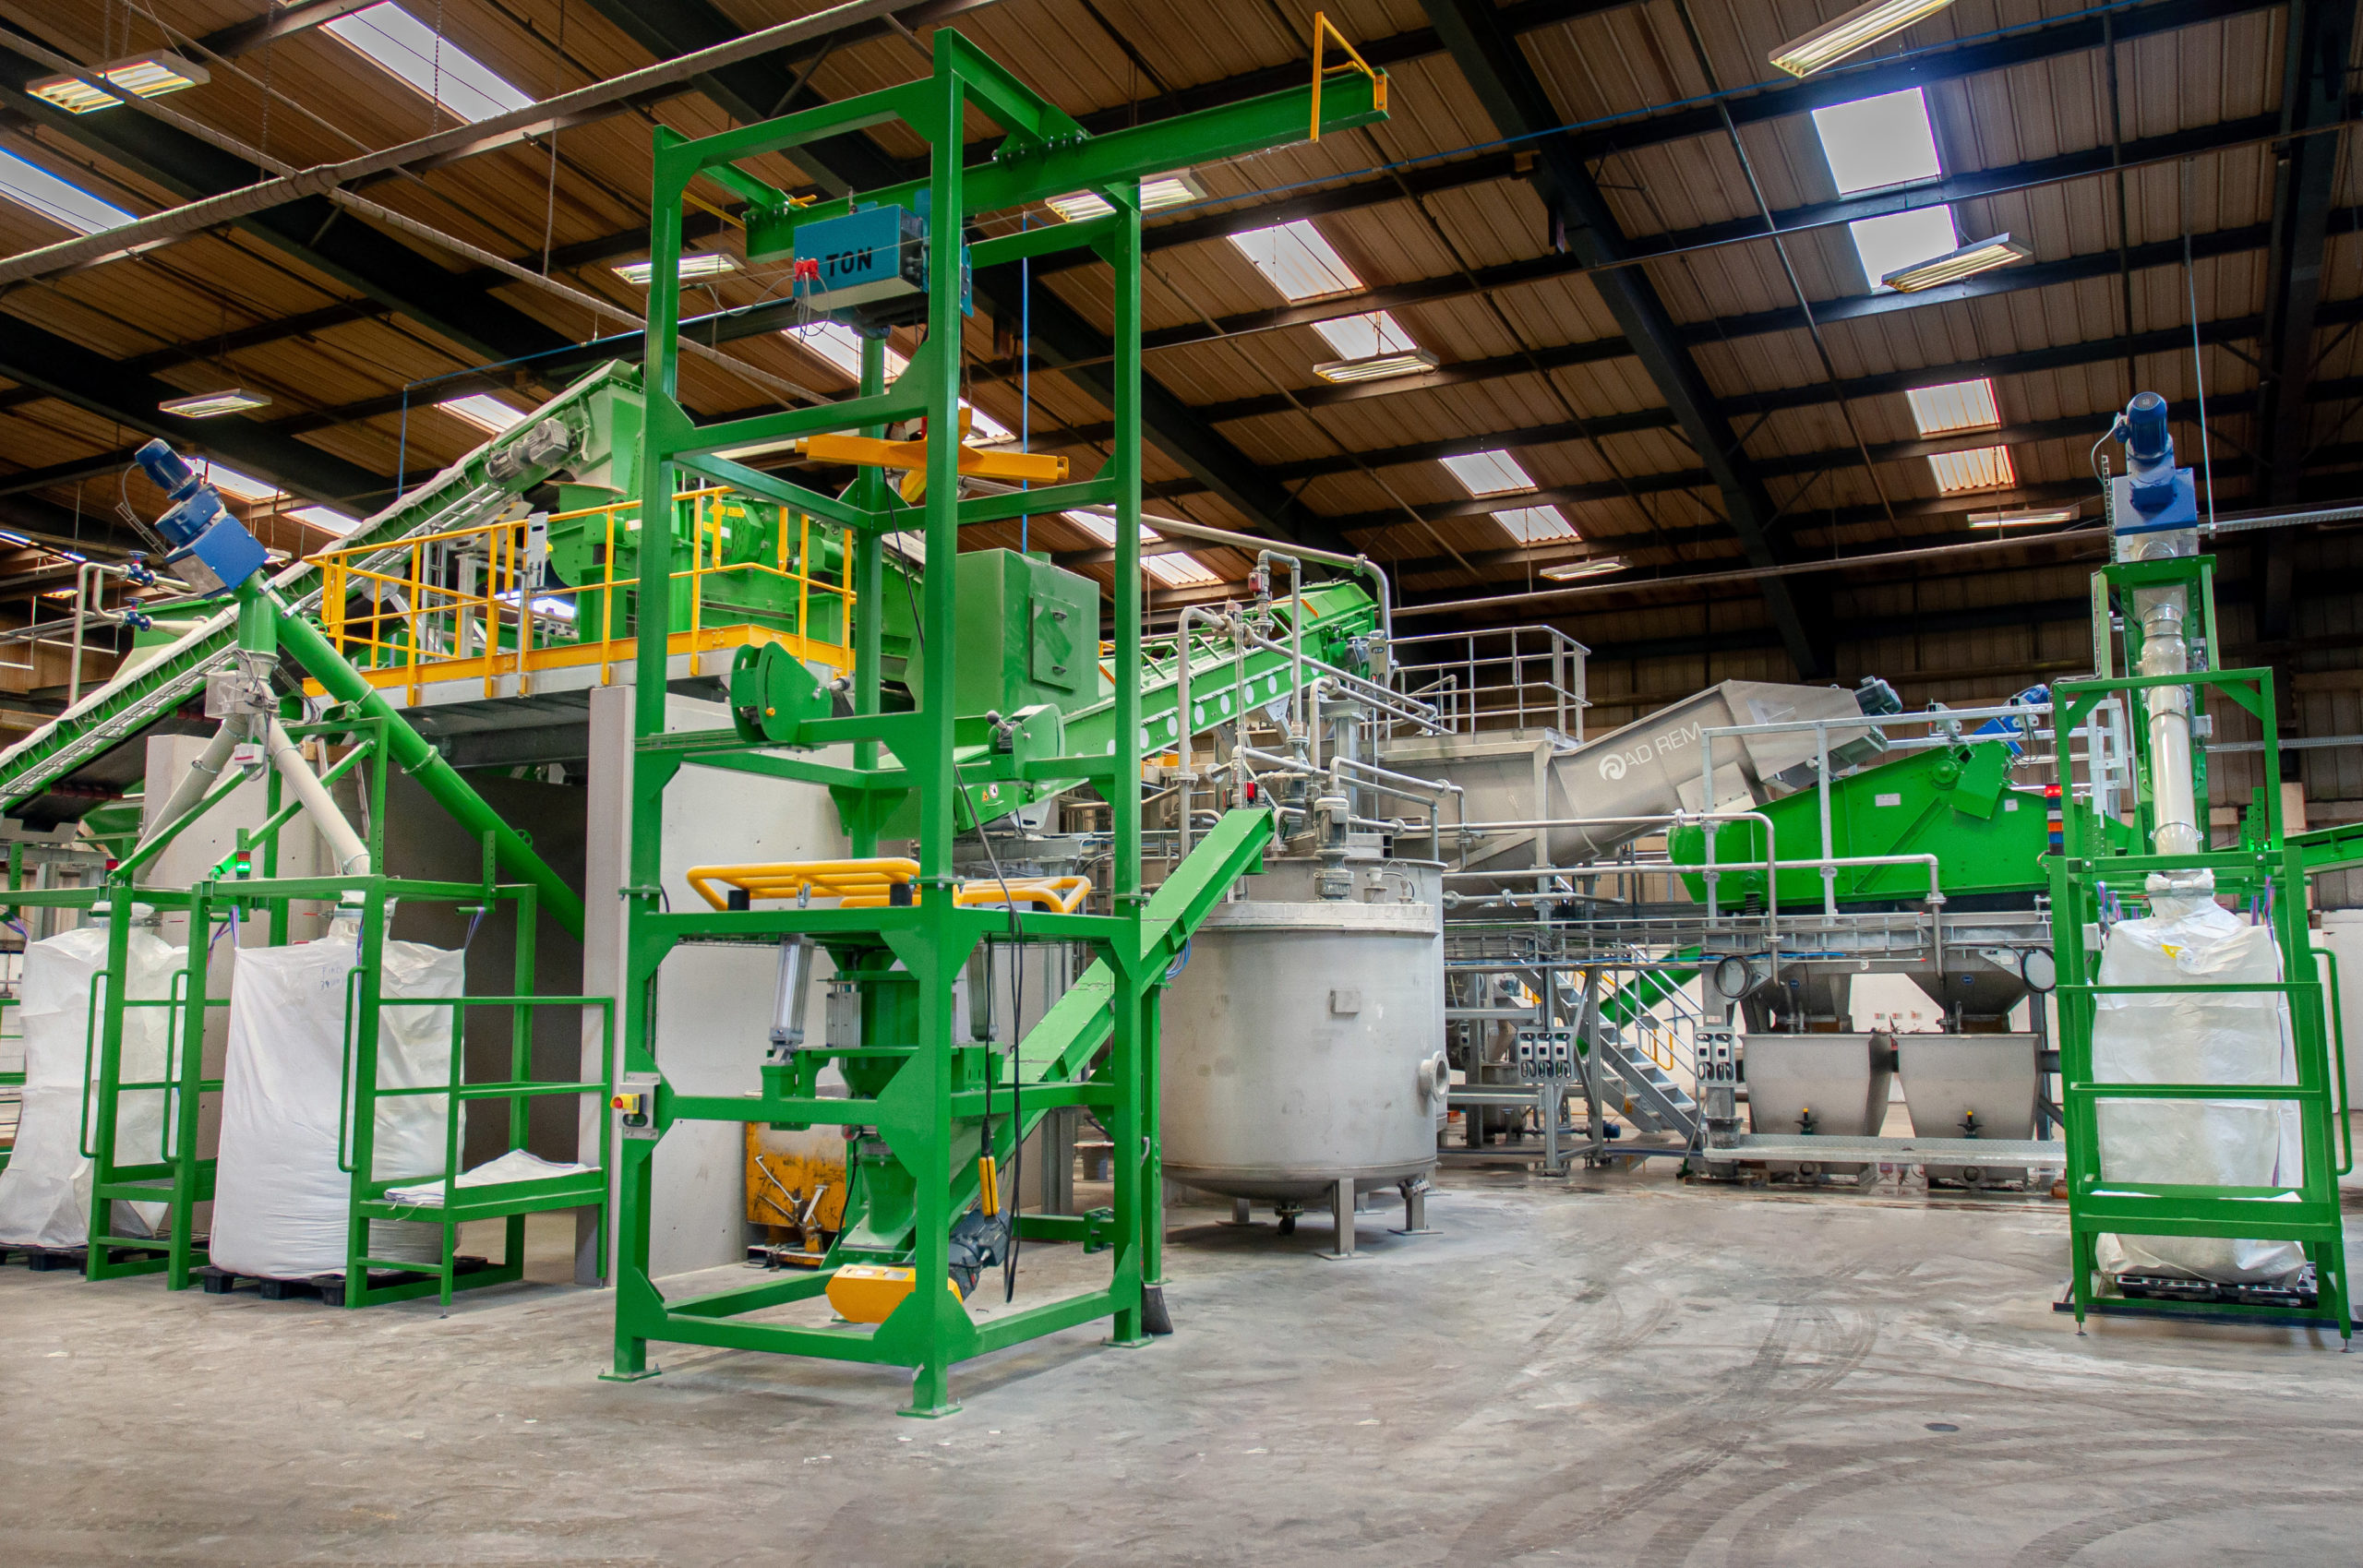 New technology for WEEE plastics recycling